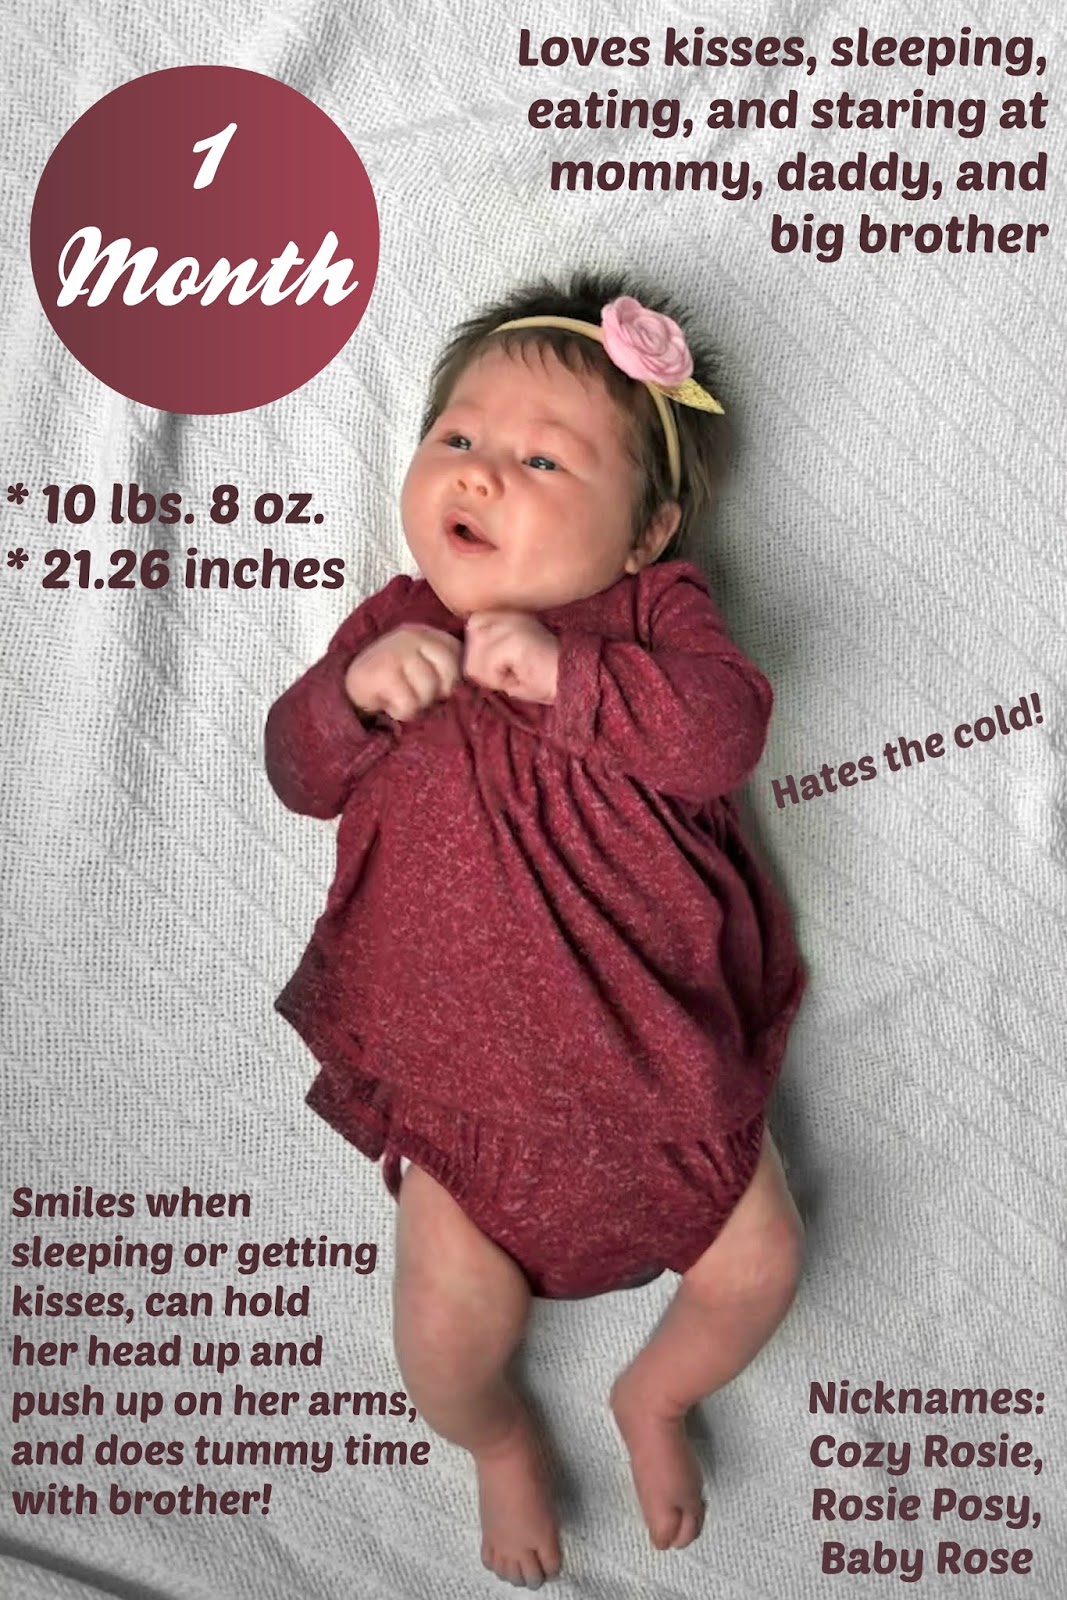 The Cooking Actress: Rose-1 Month!